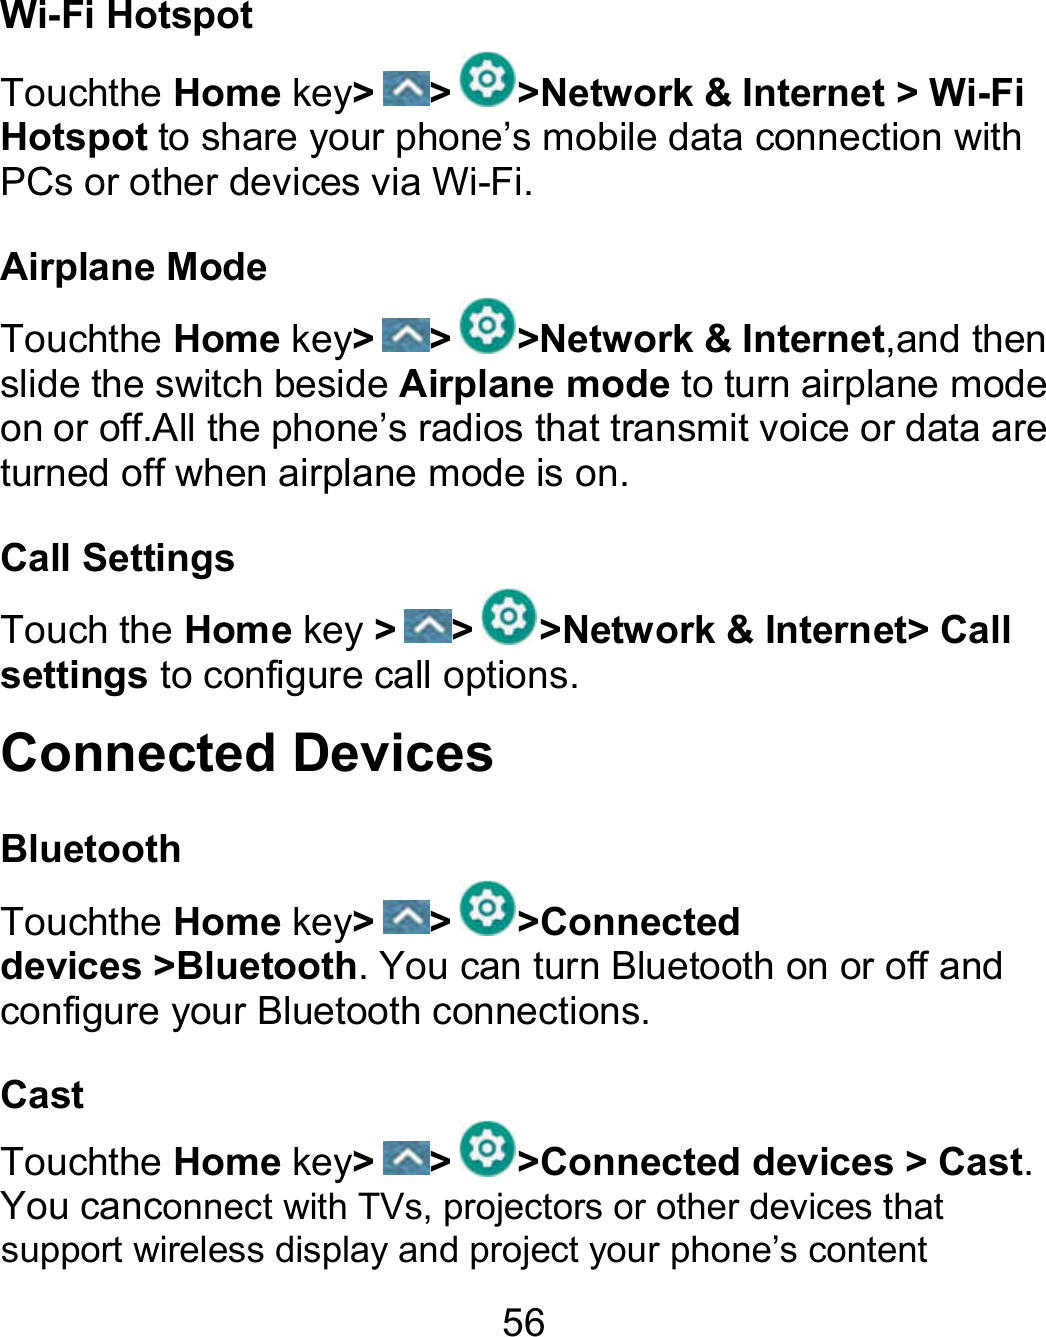 56 Wi-Fi Hotspot Touchthe Home key&gt; &gt; &gt;Network &amp; Internet &gt; Wi-Fi Hotspot to share your phone’s mobile data connection with PCs or other devices via Wi-Fi. Airplane Mode Touchthe Home key&gt; &gt; &gt;Network &amp; Internet,and then slide the switch beside Airplane mode to turn airplane mode on or off.All the phone’s radios that transmit voice or data are turned off when airplane mode is on.                                                                 Call Settings Touch the Home key &gt; &gt; &gt;Network &amp; Internet&gt; Call settings to configure call options. Connected Devices Bluetooth Touchthe Home key&gt; &gt; &gt;Connected devices &gt;Bluetooth. You can turn Bluetooth on or off and configure your Bluetooth connections. Cast Touchthe Home key&gt; &gt; &gt;Connected devices &gt; Cast. You canconnect with TVs, projectors or other devices that support wireless display and project your phone’s content 